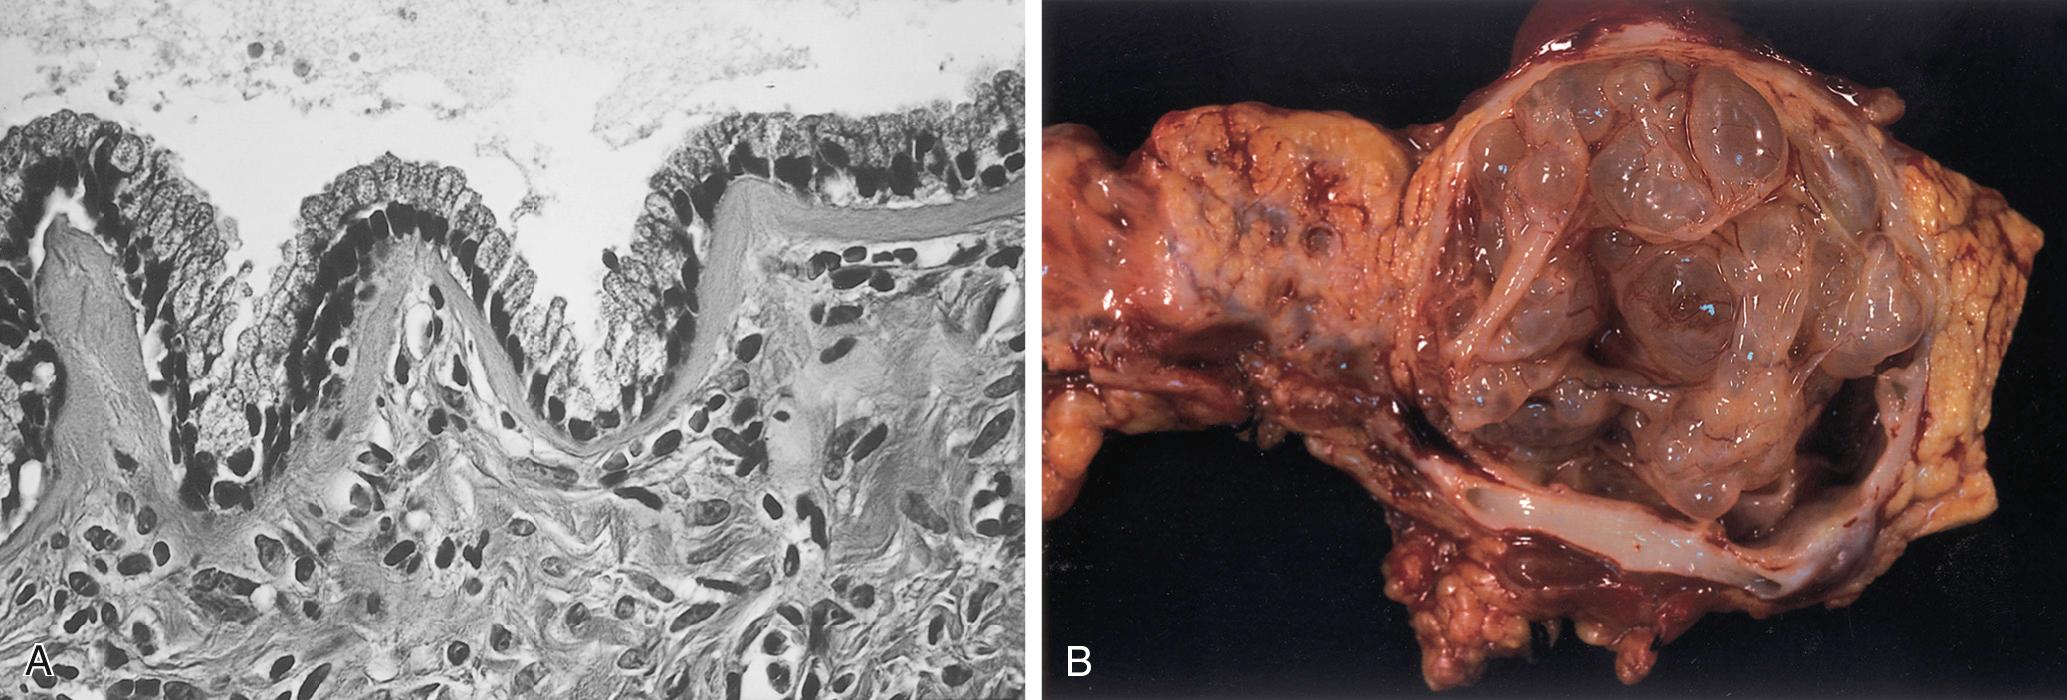 FIGURE 98.2, Mucinous cystic neoplasm of the pancreas. (A) Columnar mucinous cells line the cyst wall. (B) Gross appearance of macrocysts with thin walls and mucinous cystic fluid.